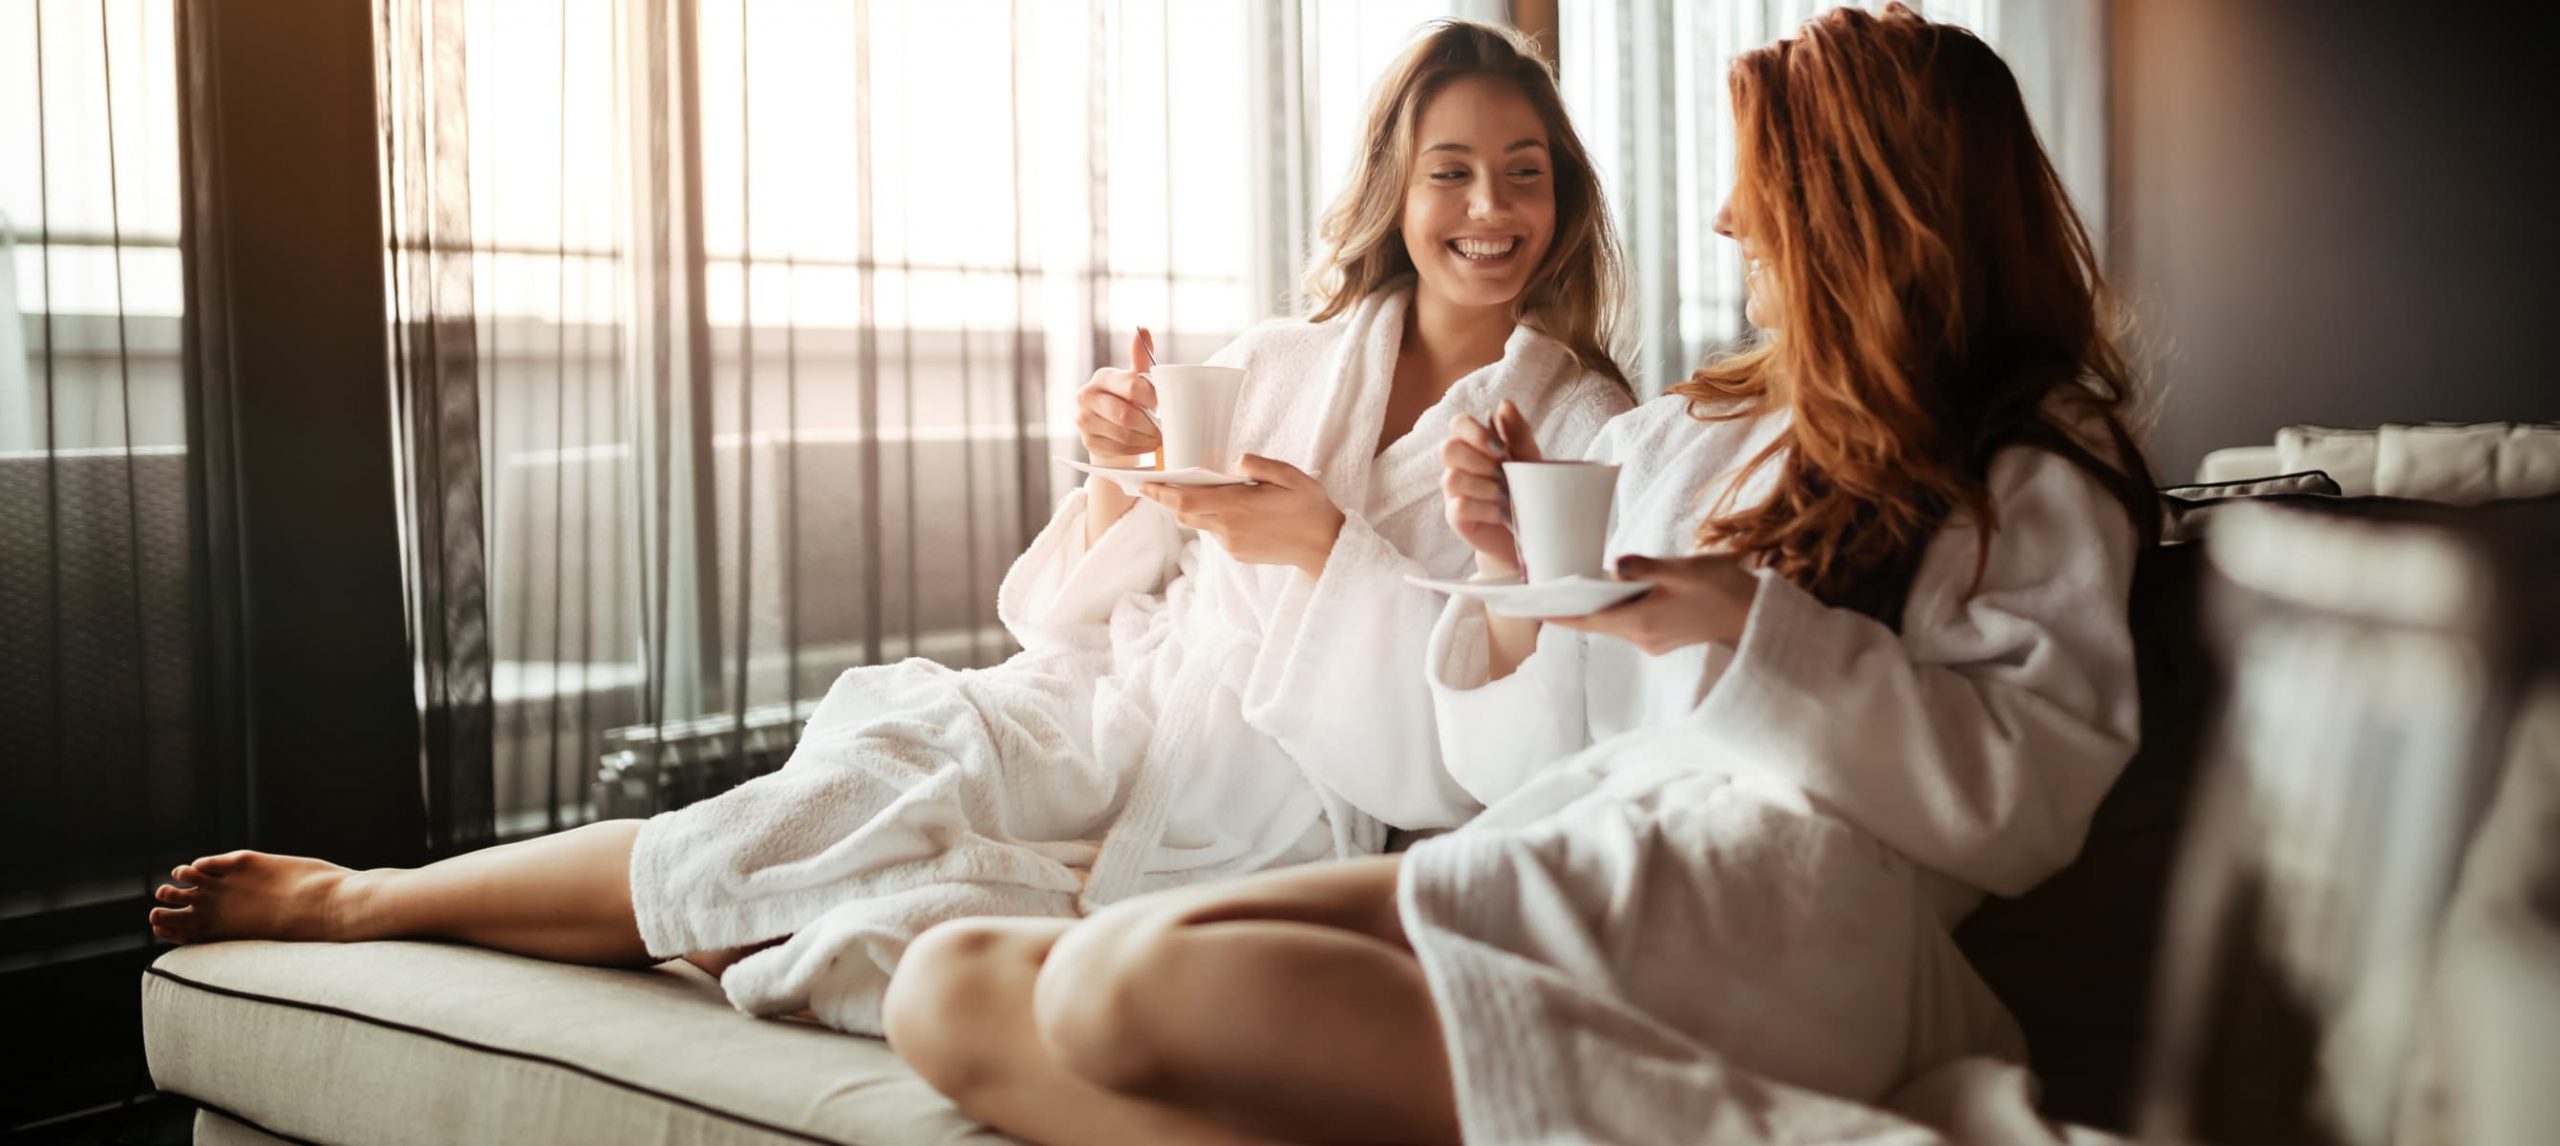 Two females smiling at each other with tea in their hands at a spa retreat